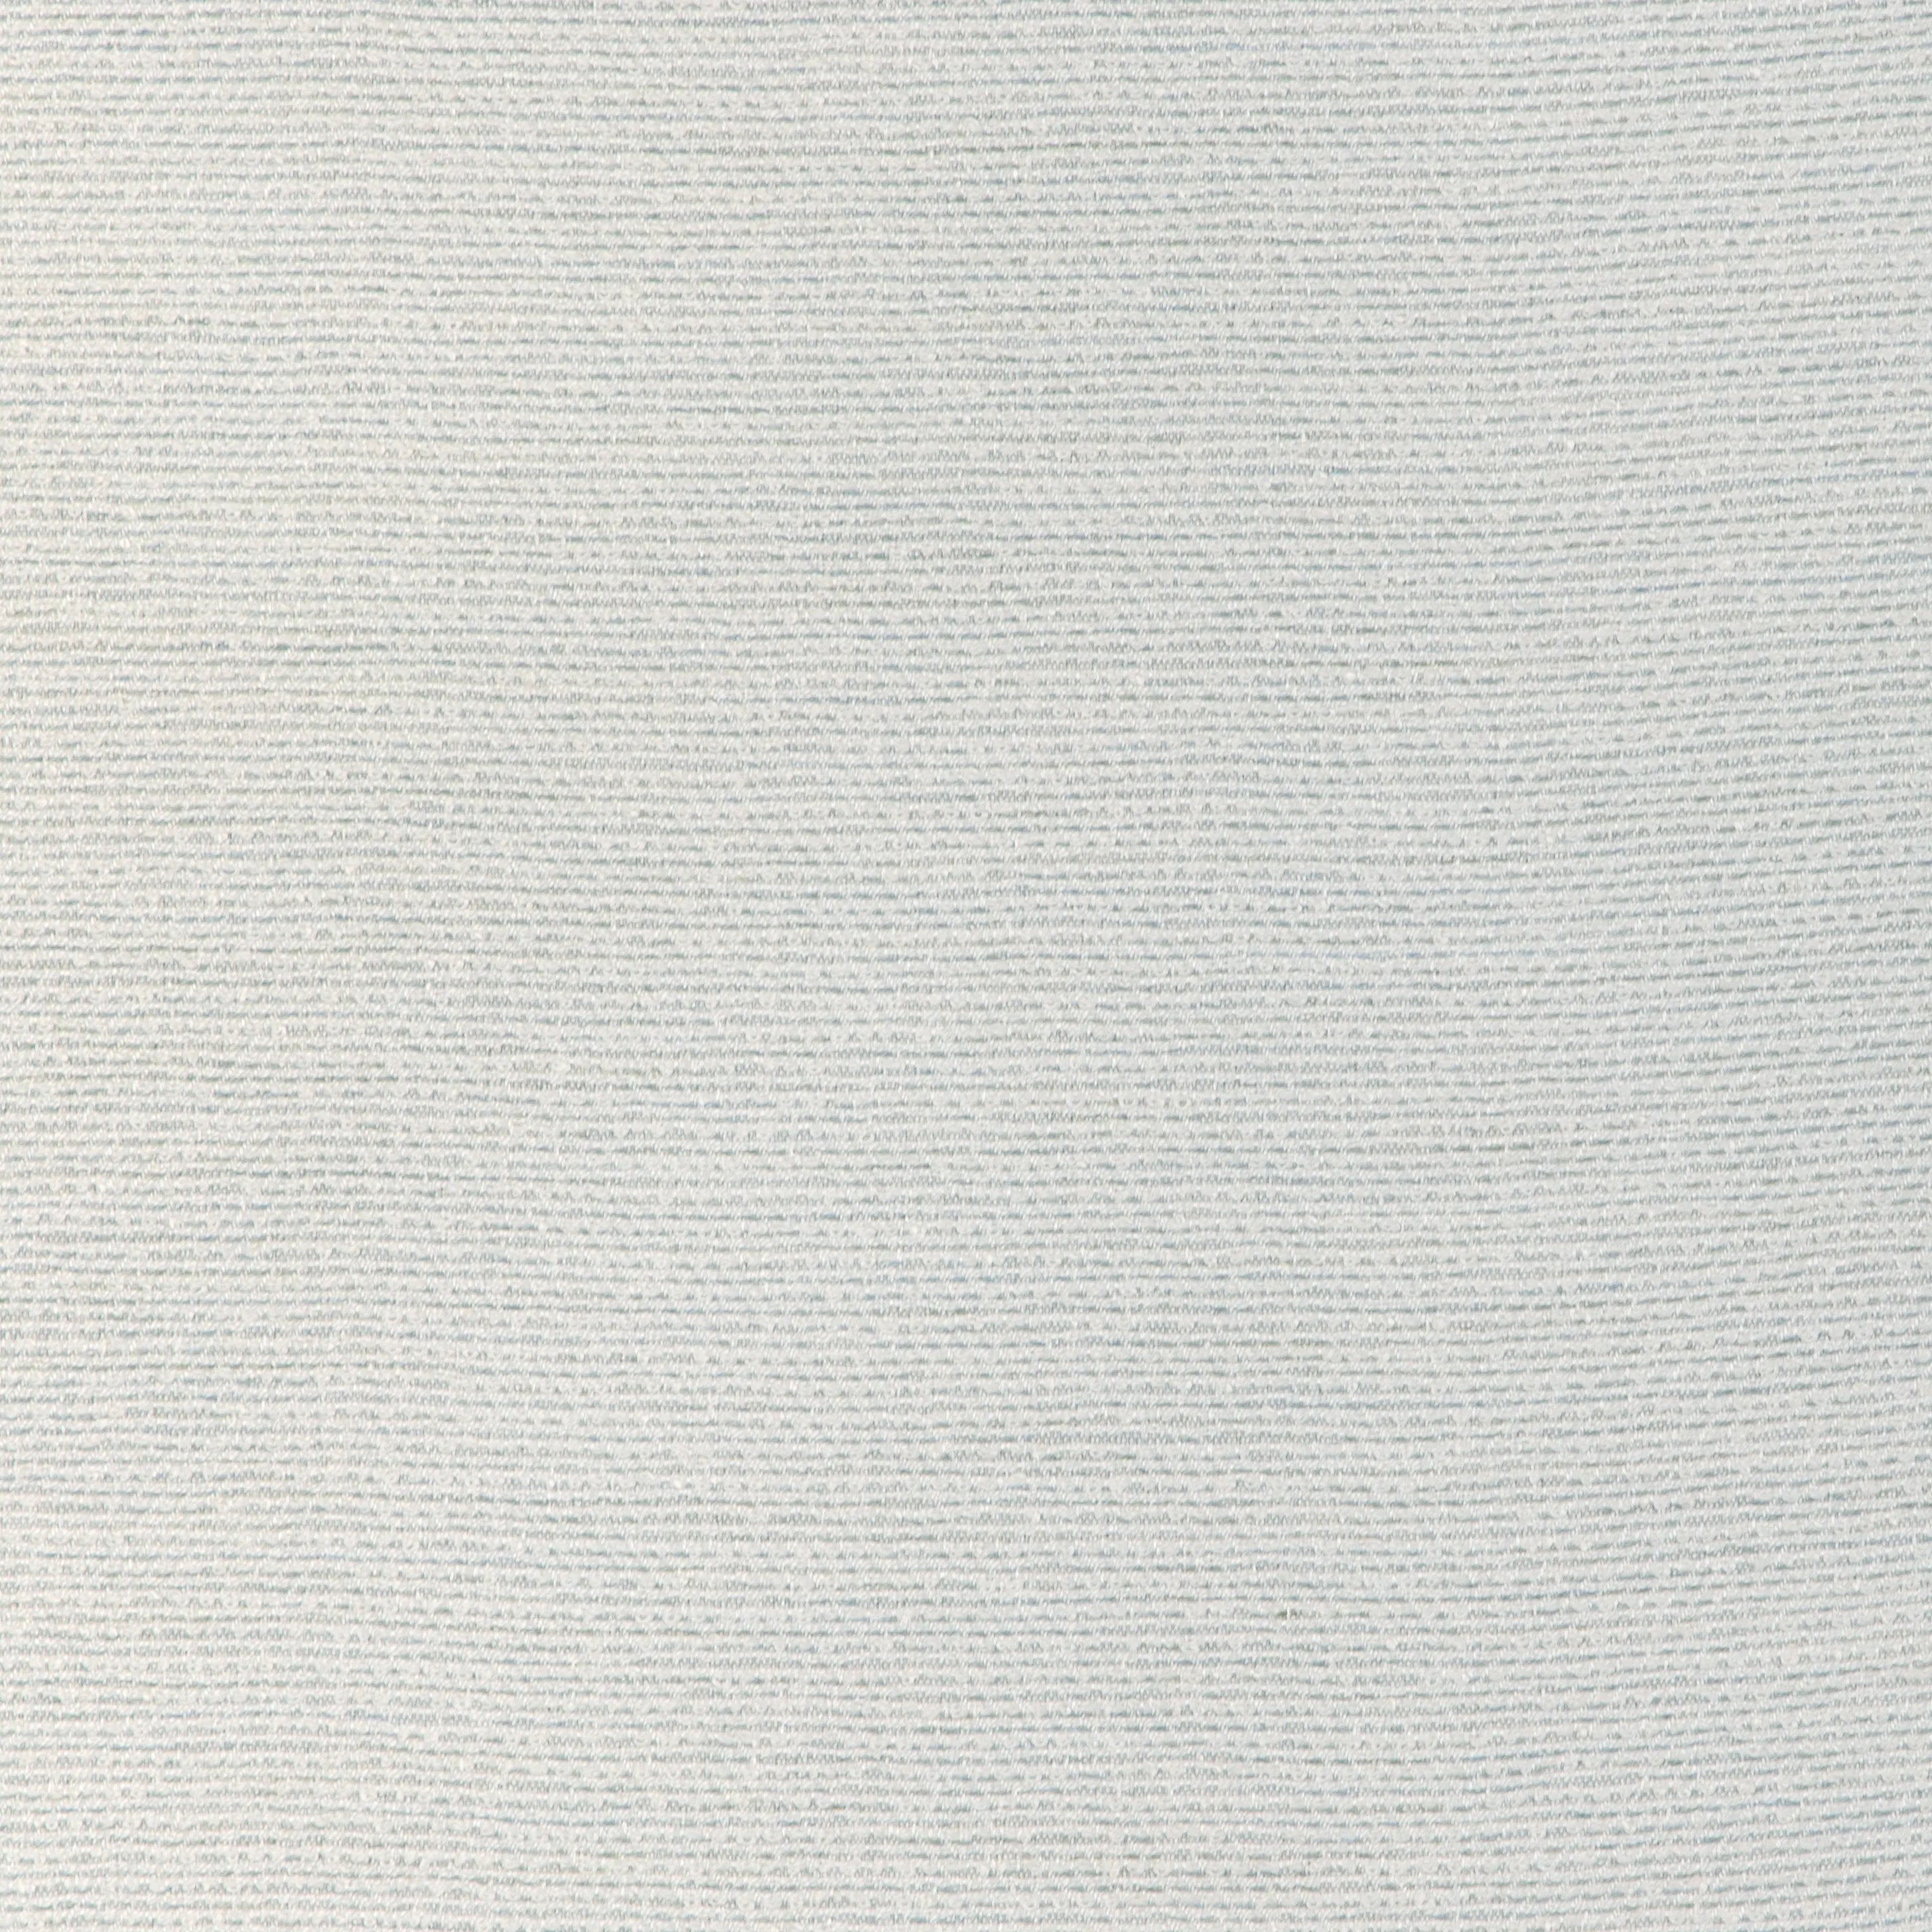 Chatham Texture fabric in seaglass color - pattern 36935.15.0 - by Kravet Couture in the Riviera collection